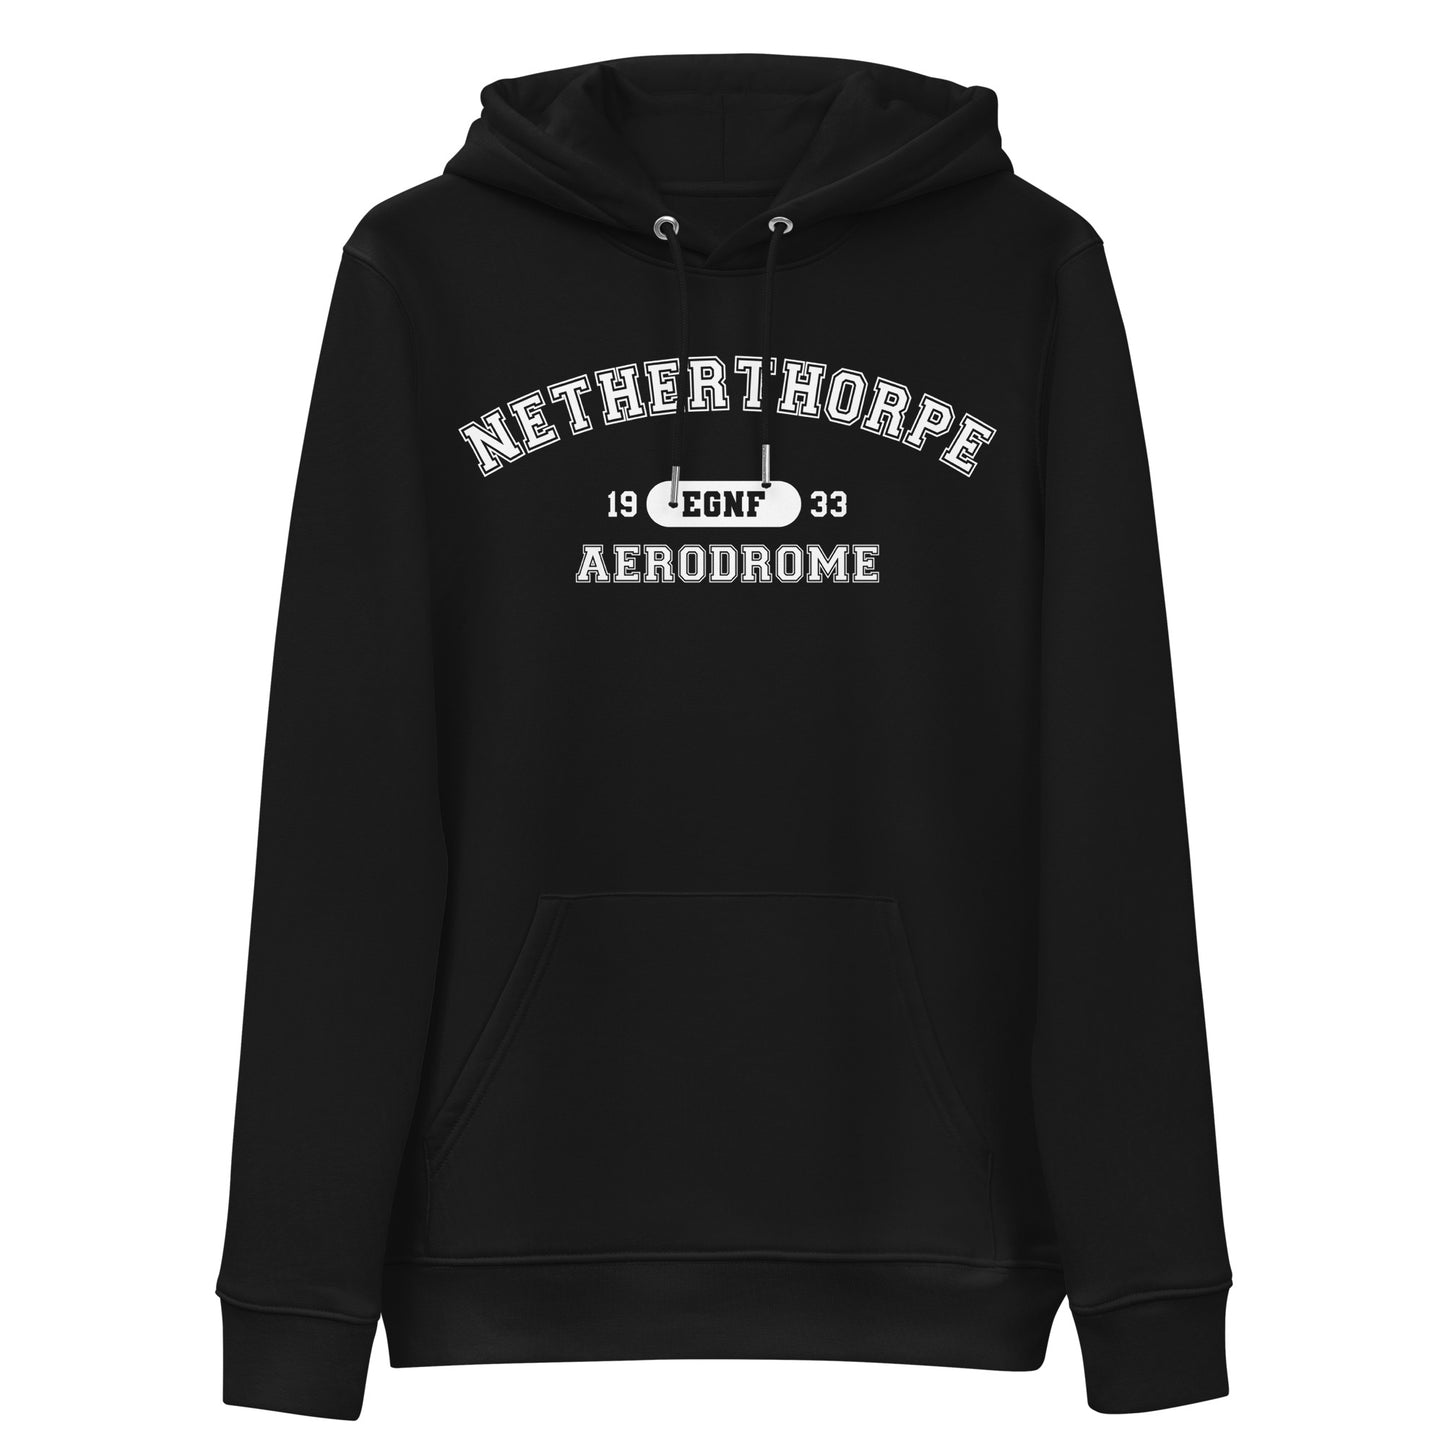 Black Netherthorpe Aerodrome collegiate heavyweight hoodie features a classic collegiate style print with the airport's name, ICAO code and date of construction on the front.